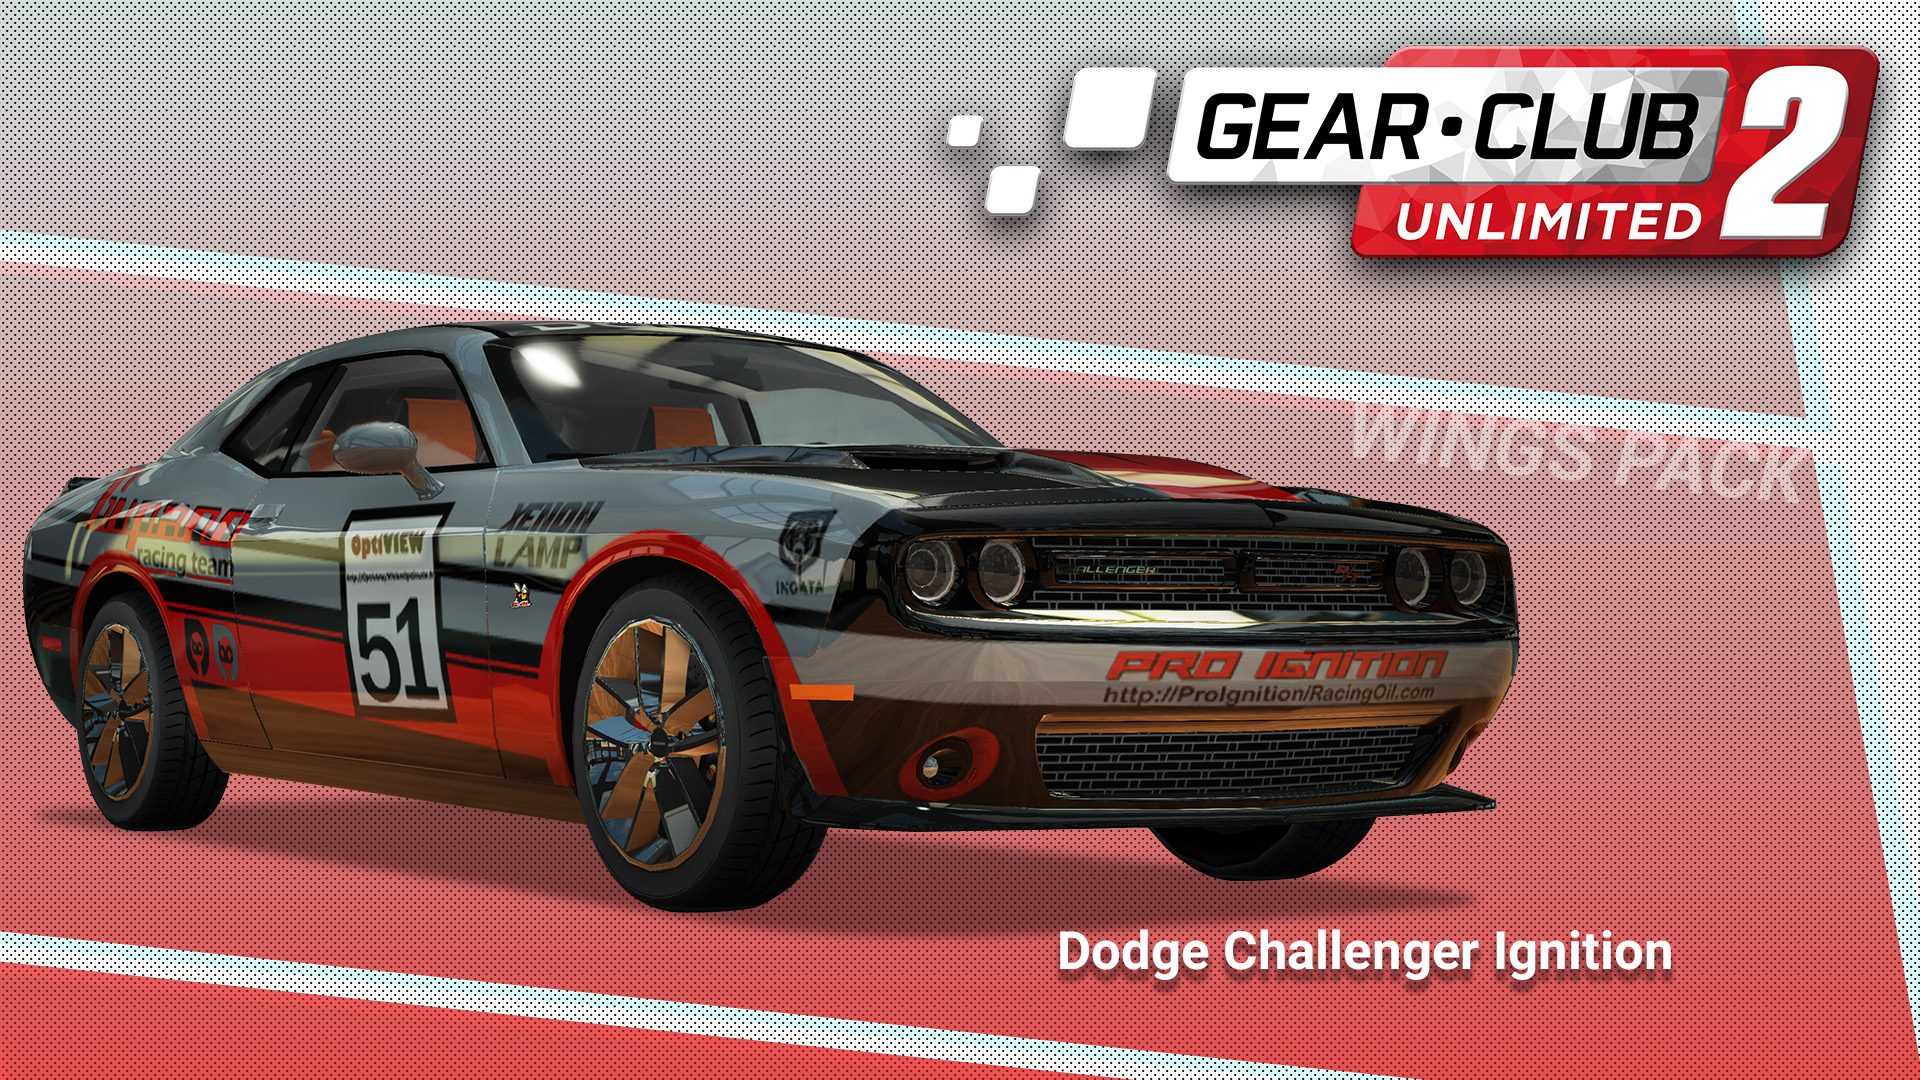 Dodge Challenger Ignition - Gear.Club Unlimited 2